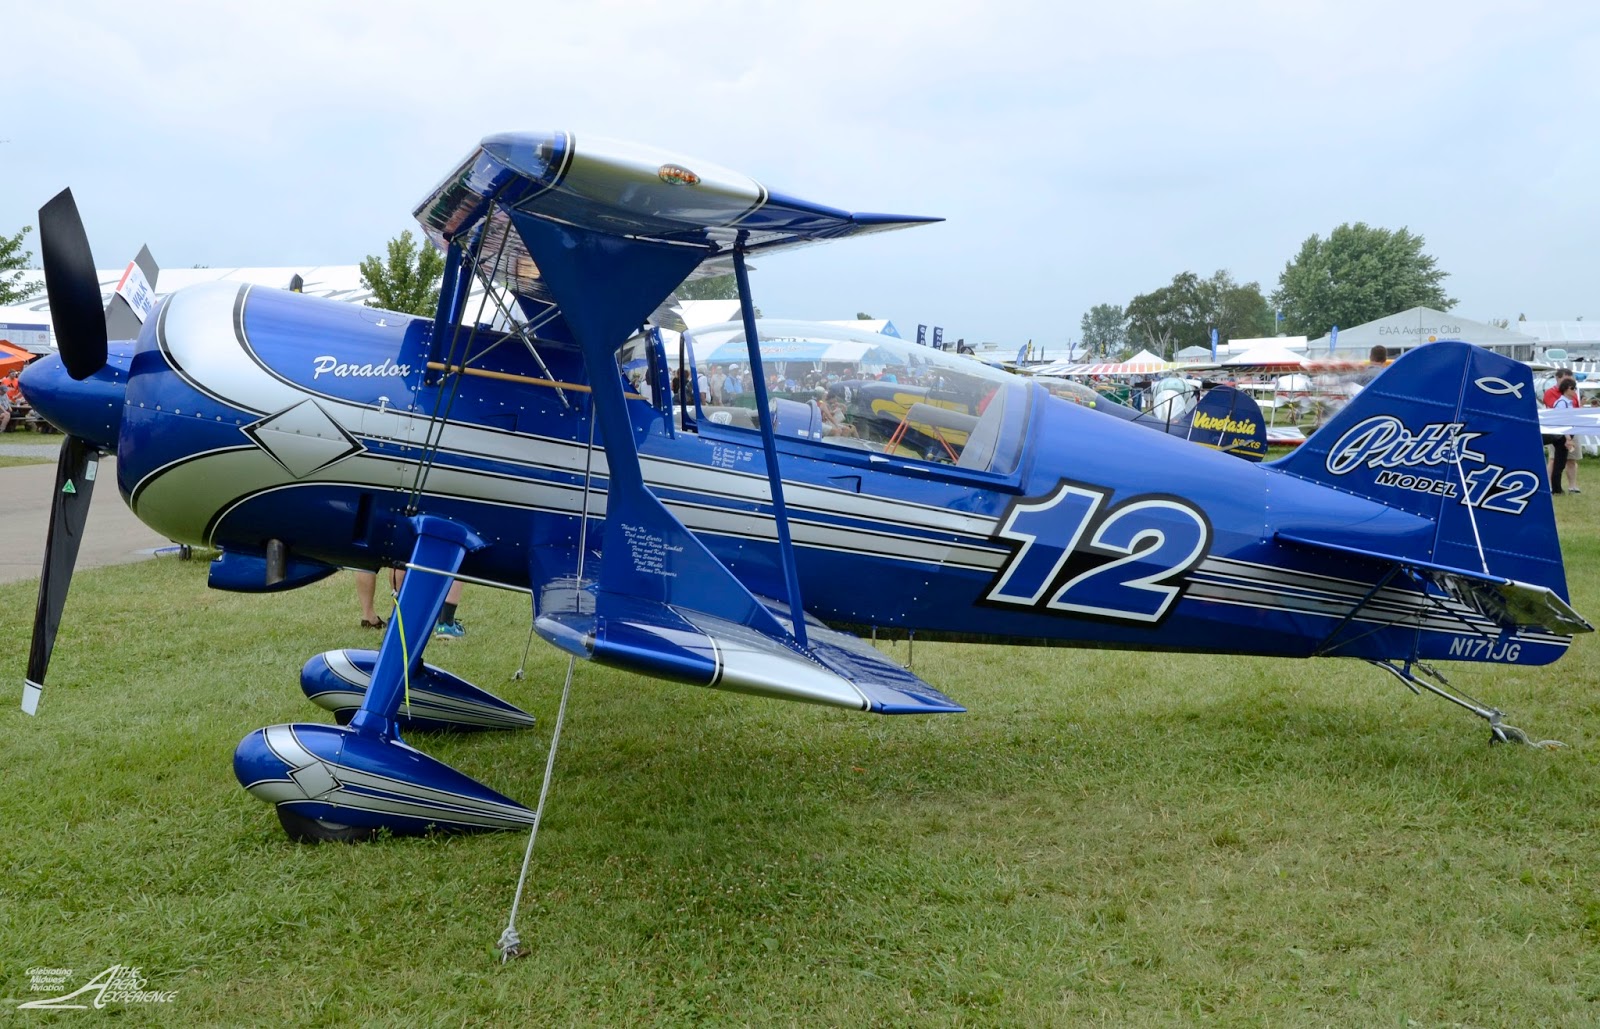 Your Insider Ticket to the Oshkosh Air Show